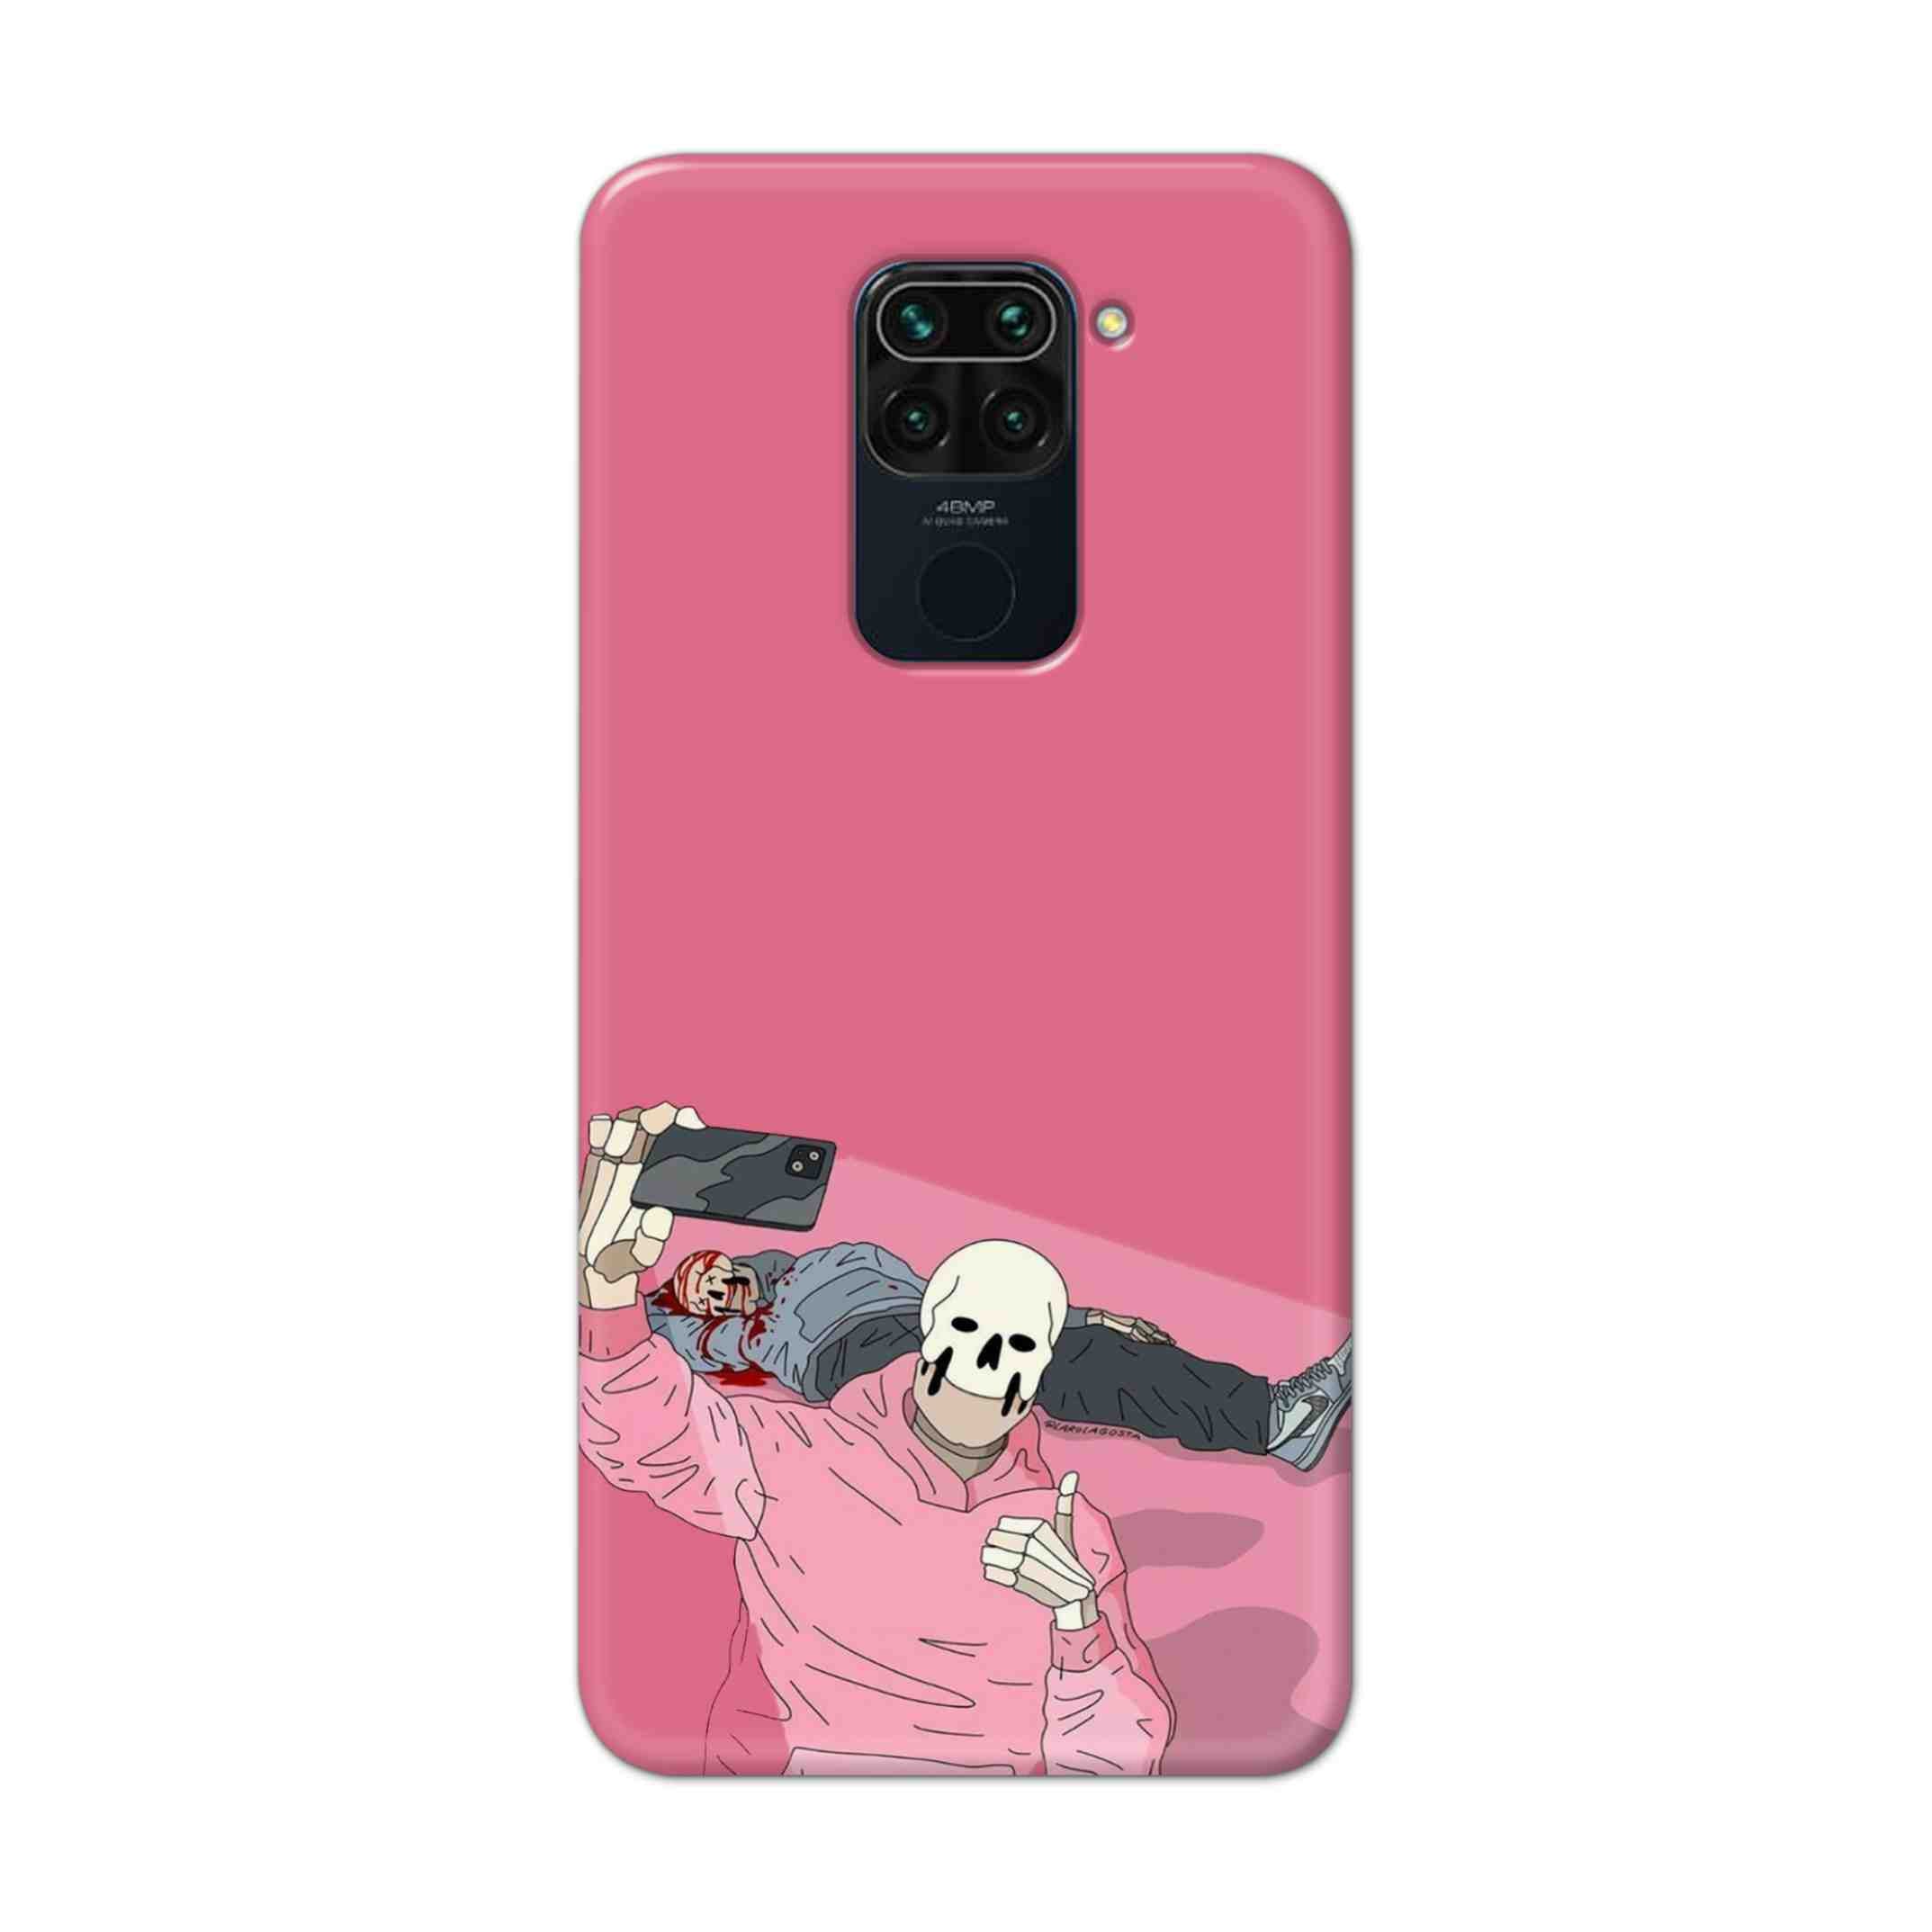 Buy Selfie Hard Back Mobile Phone Case Cover For Xiaomi Redmi Note 9 Online